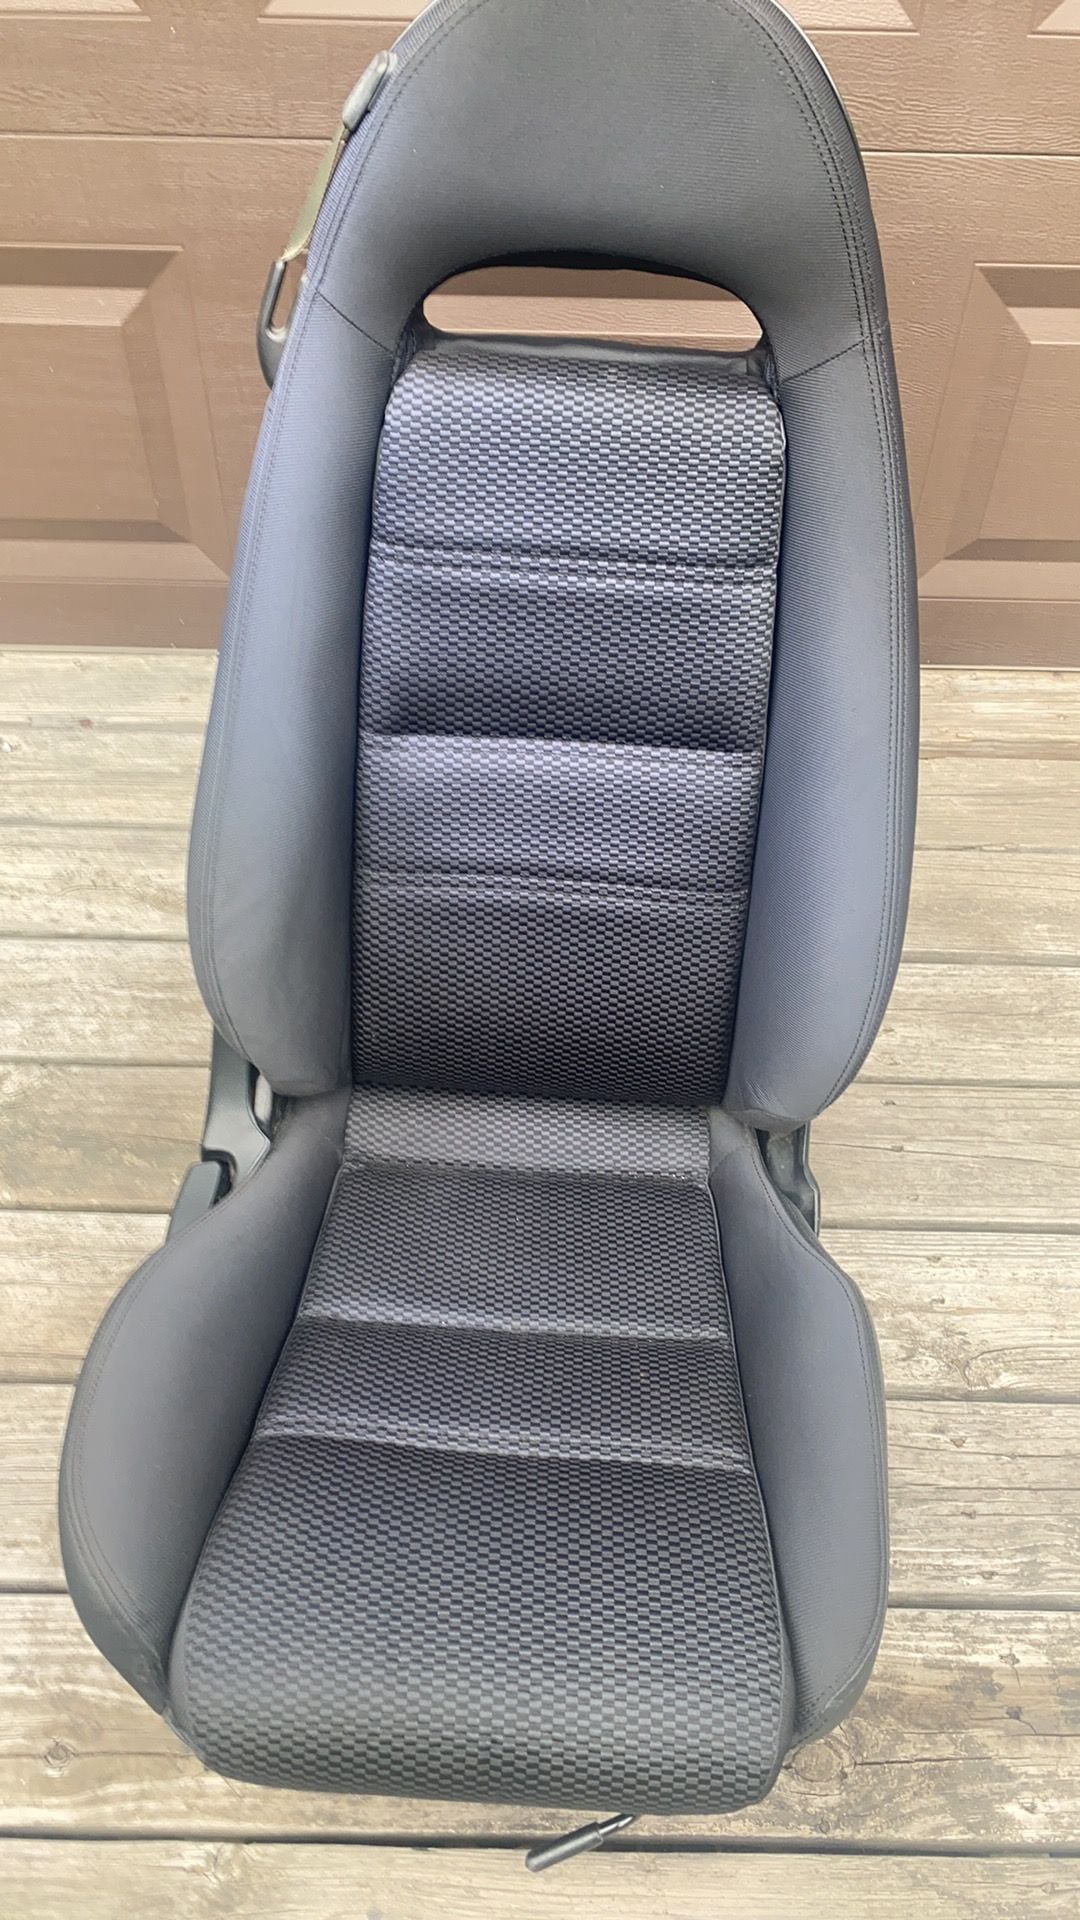 Interior/Upholstery - RX-7 FD RHD Drivers Right Seat! Or can be also used for LHD FD Passenger seat! - Used - 1992 to 2002 Mazda RX-7 - Prince Frederick, MD 20678, United States